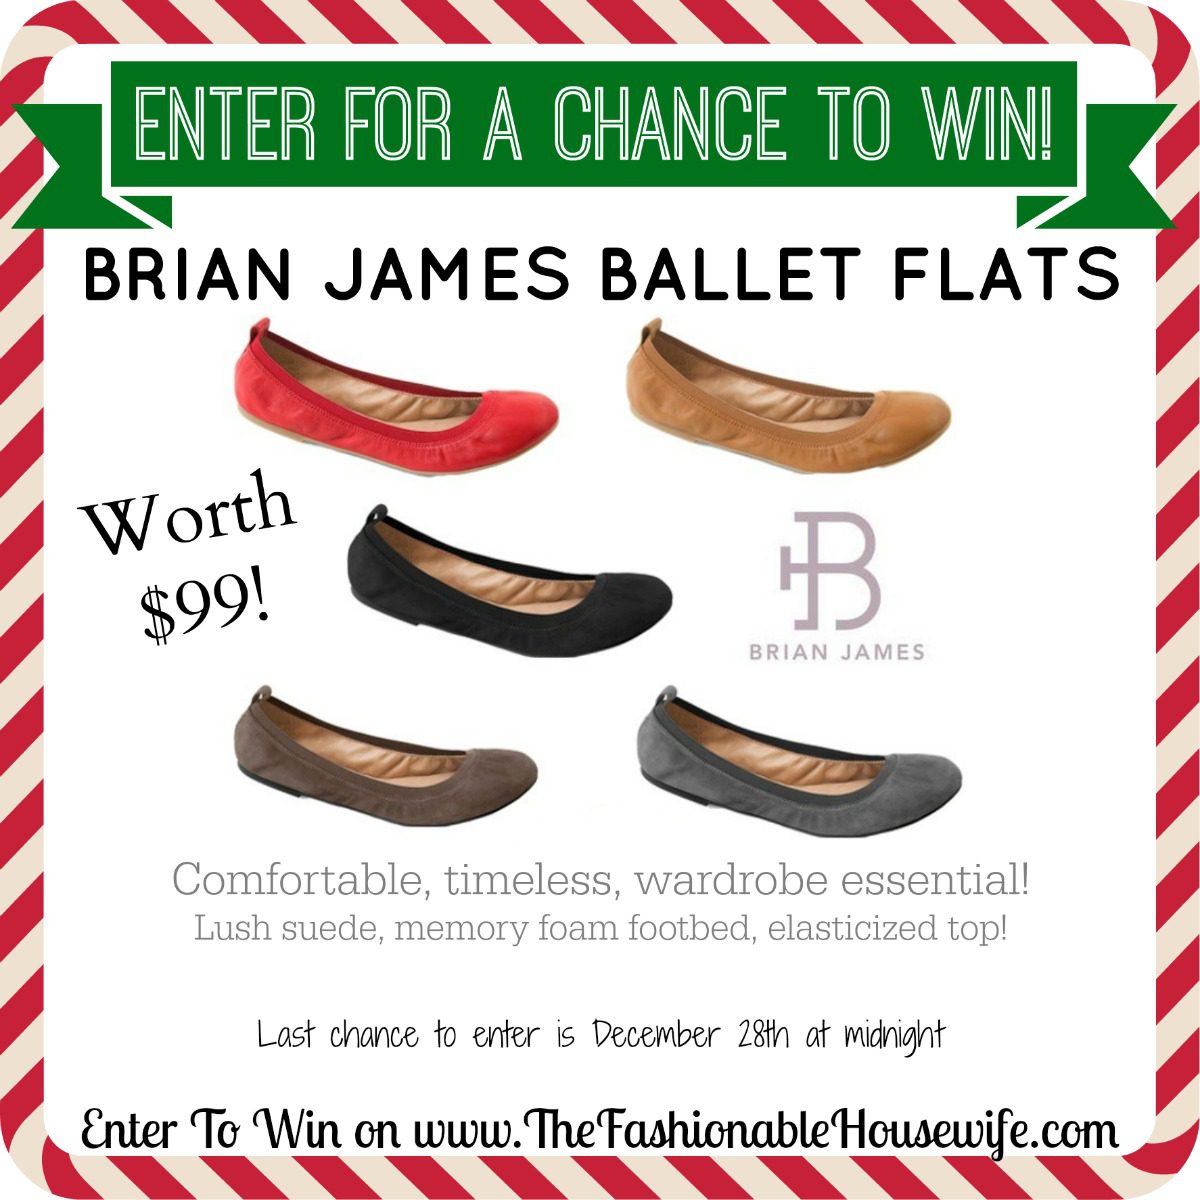 Enter for a chance to win Brian James ballet flats